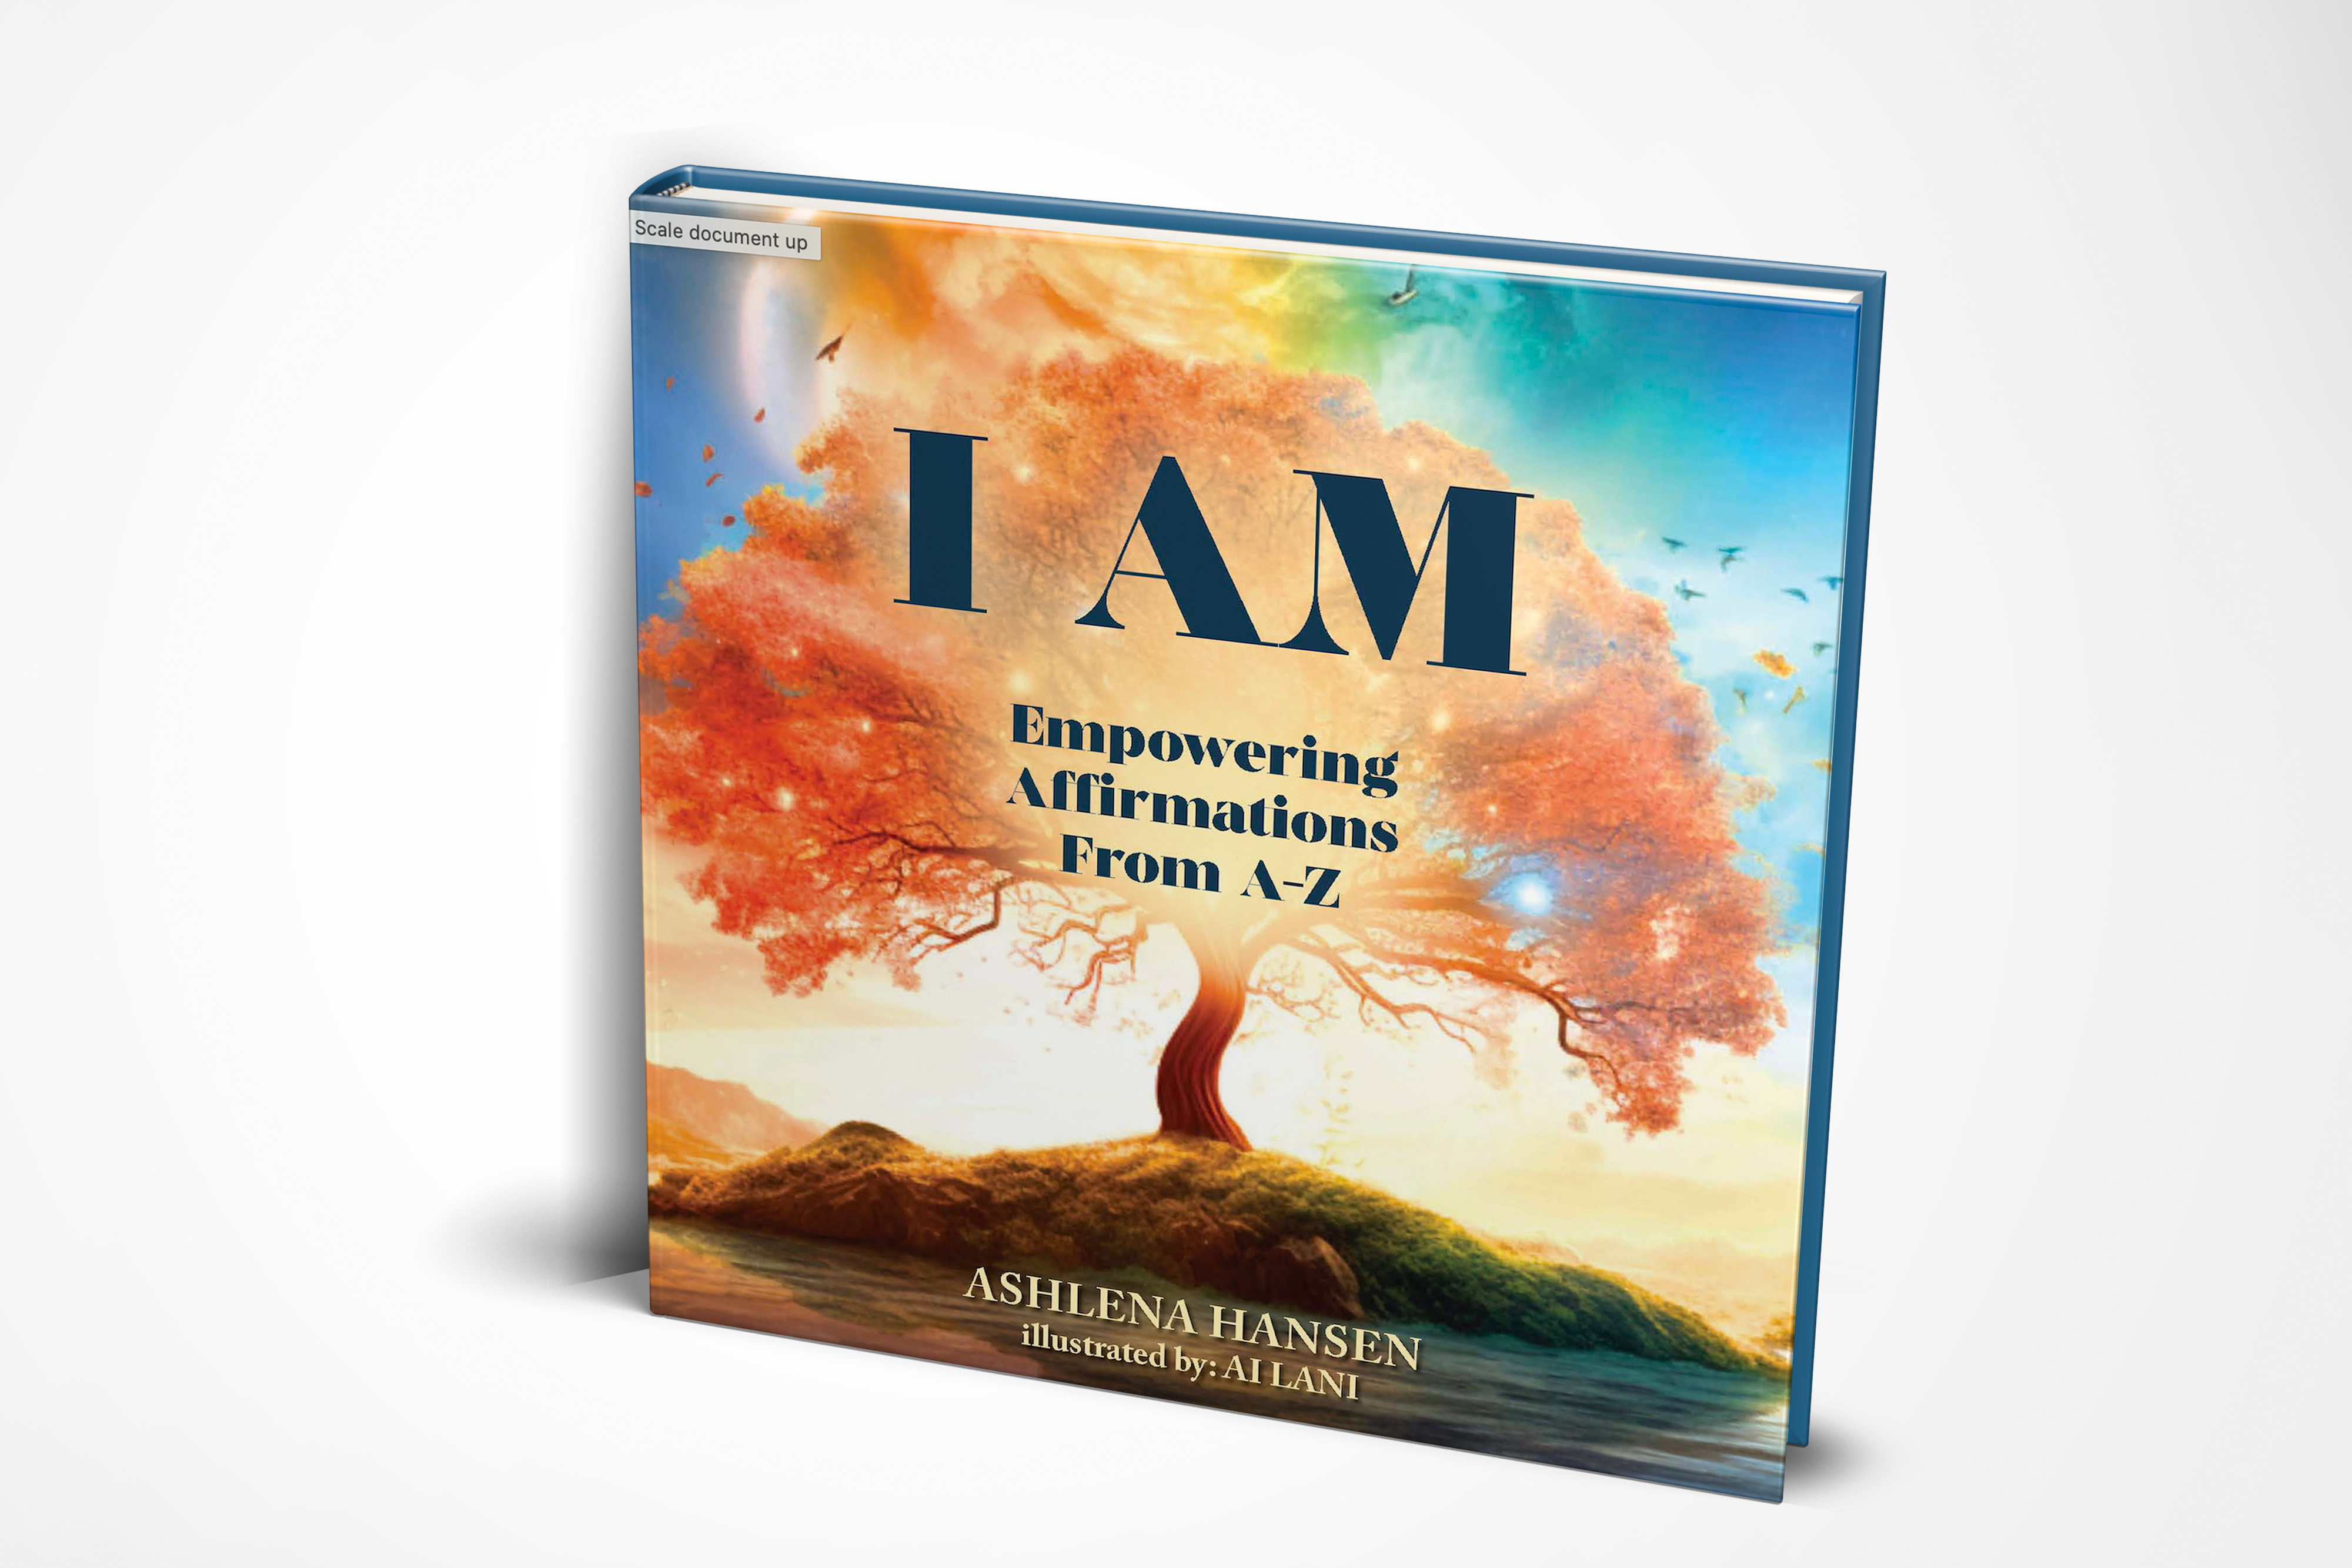 I AM: Empowering Affirmations from A-Z